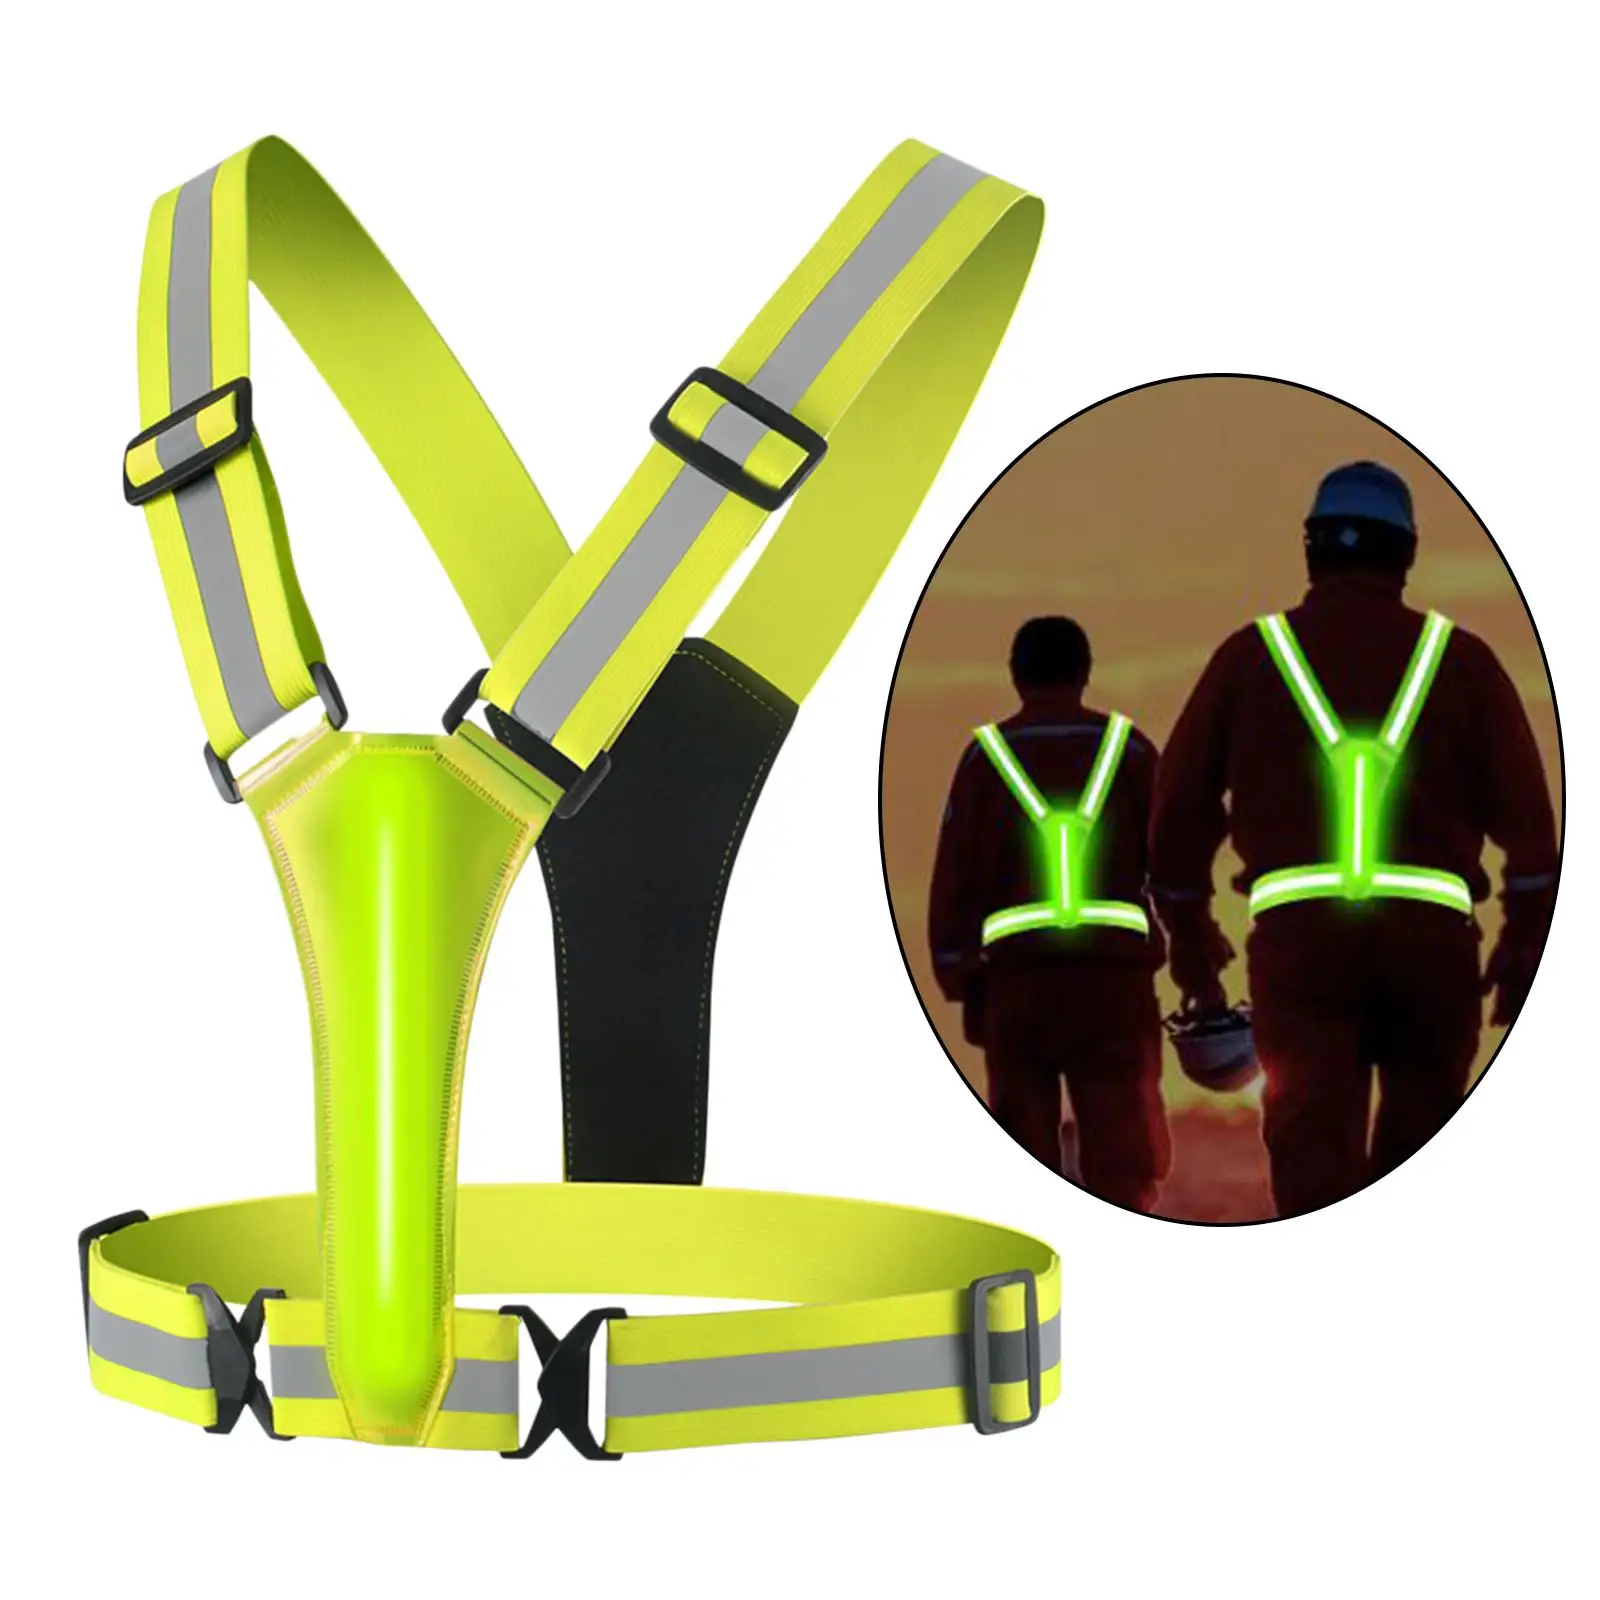 LED Reflective Vest Adjustable USB Rechargeable 3 Lighting Modes Night Running Gear for Cycling Motorcycling Men Women Runners